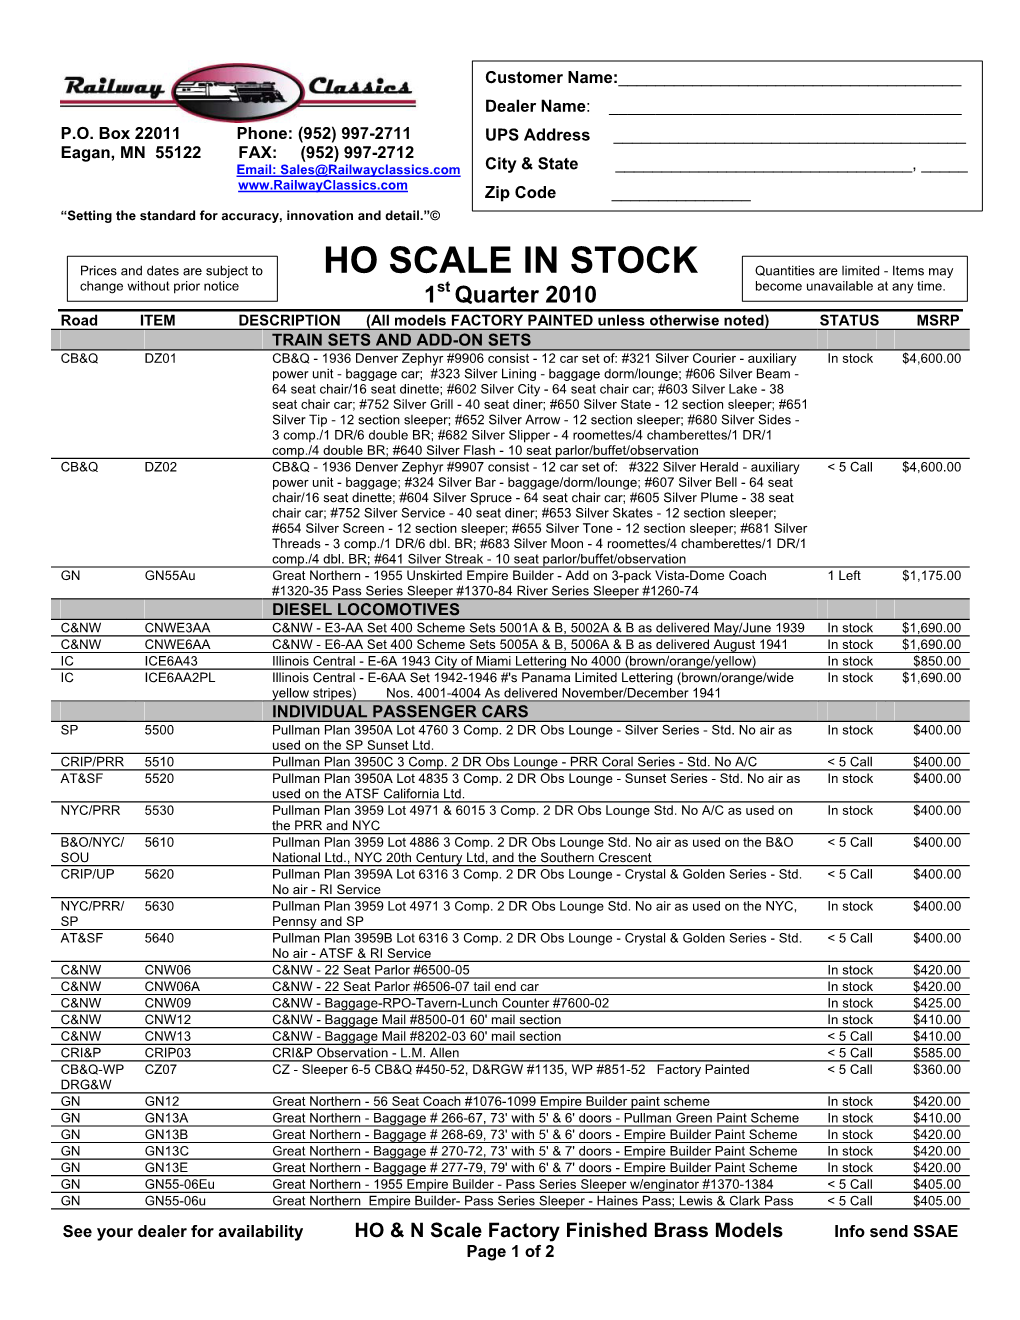 HO SCALE in STOCK Quantities Are Limited - Items May Change Without Prior Notice 1St Quarter 2010 Become Unavailable at Any Time